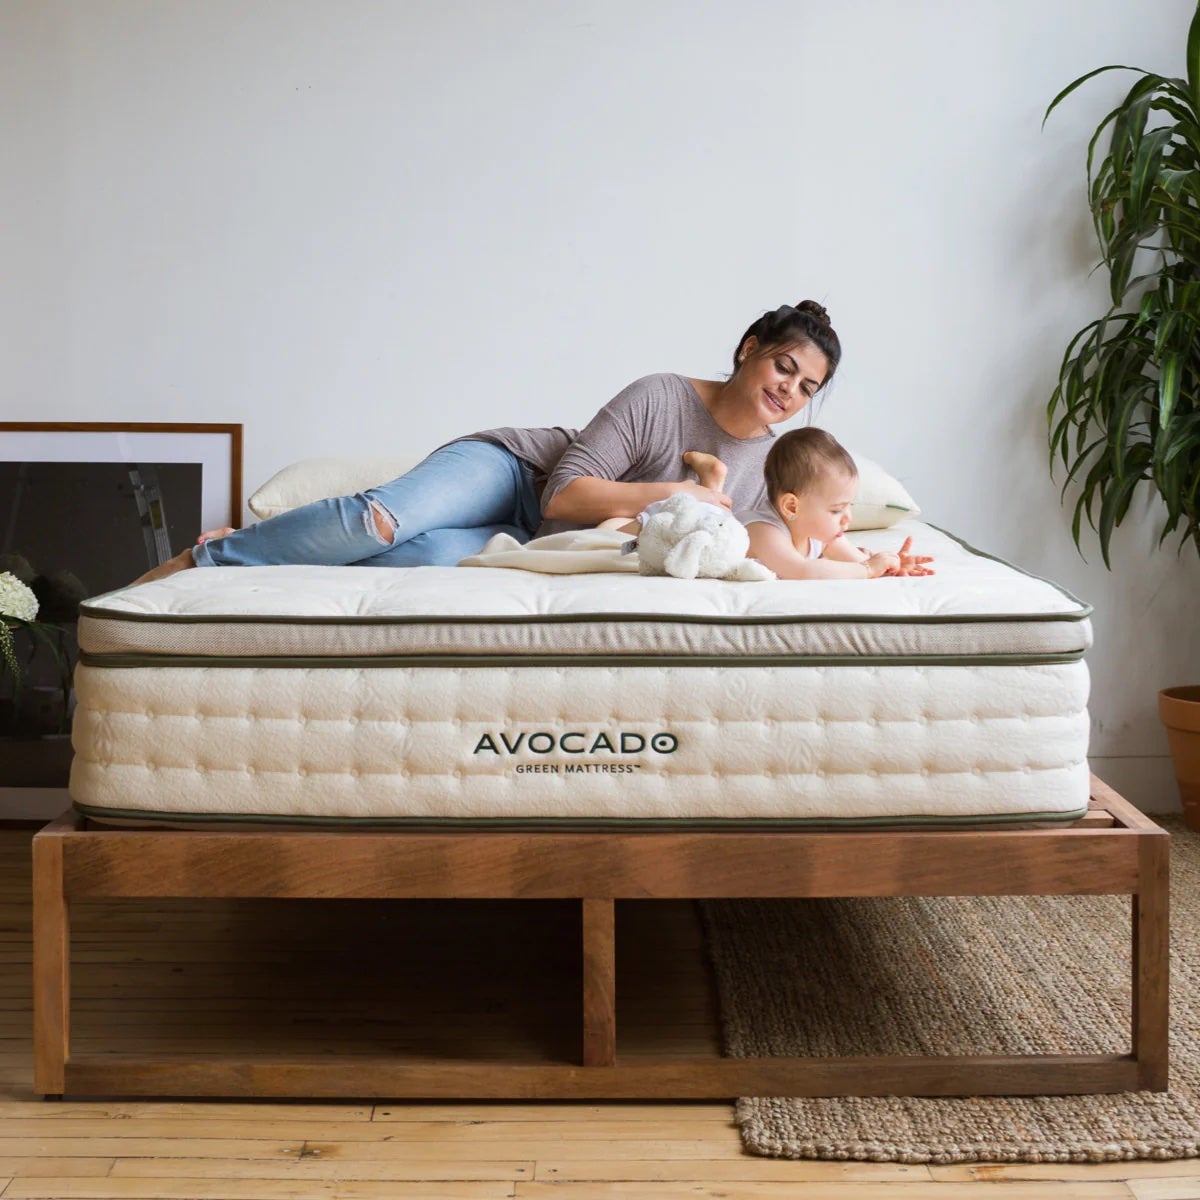 woman and baby on Avocado Green Mattress